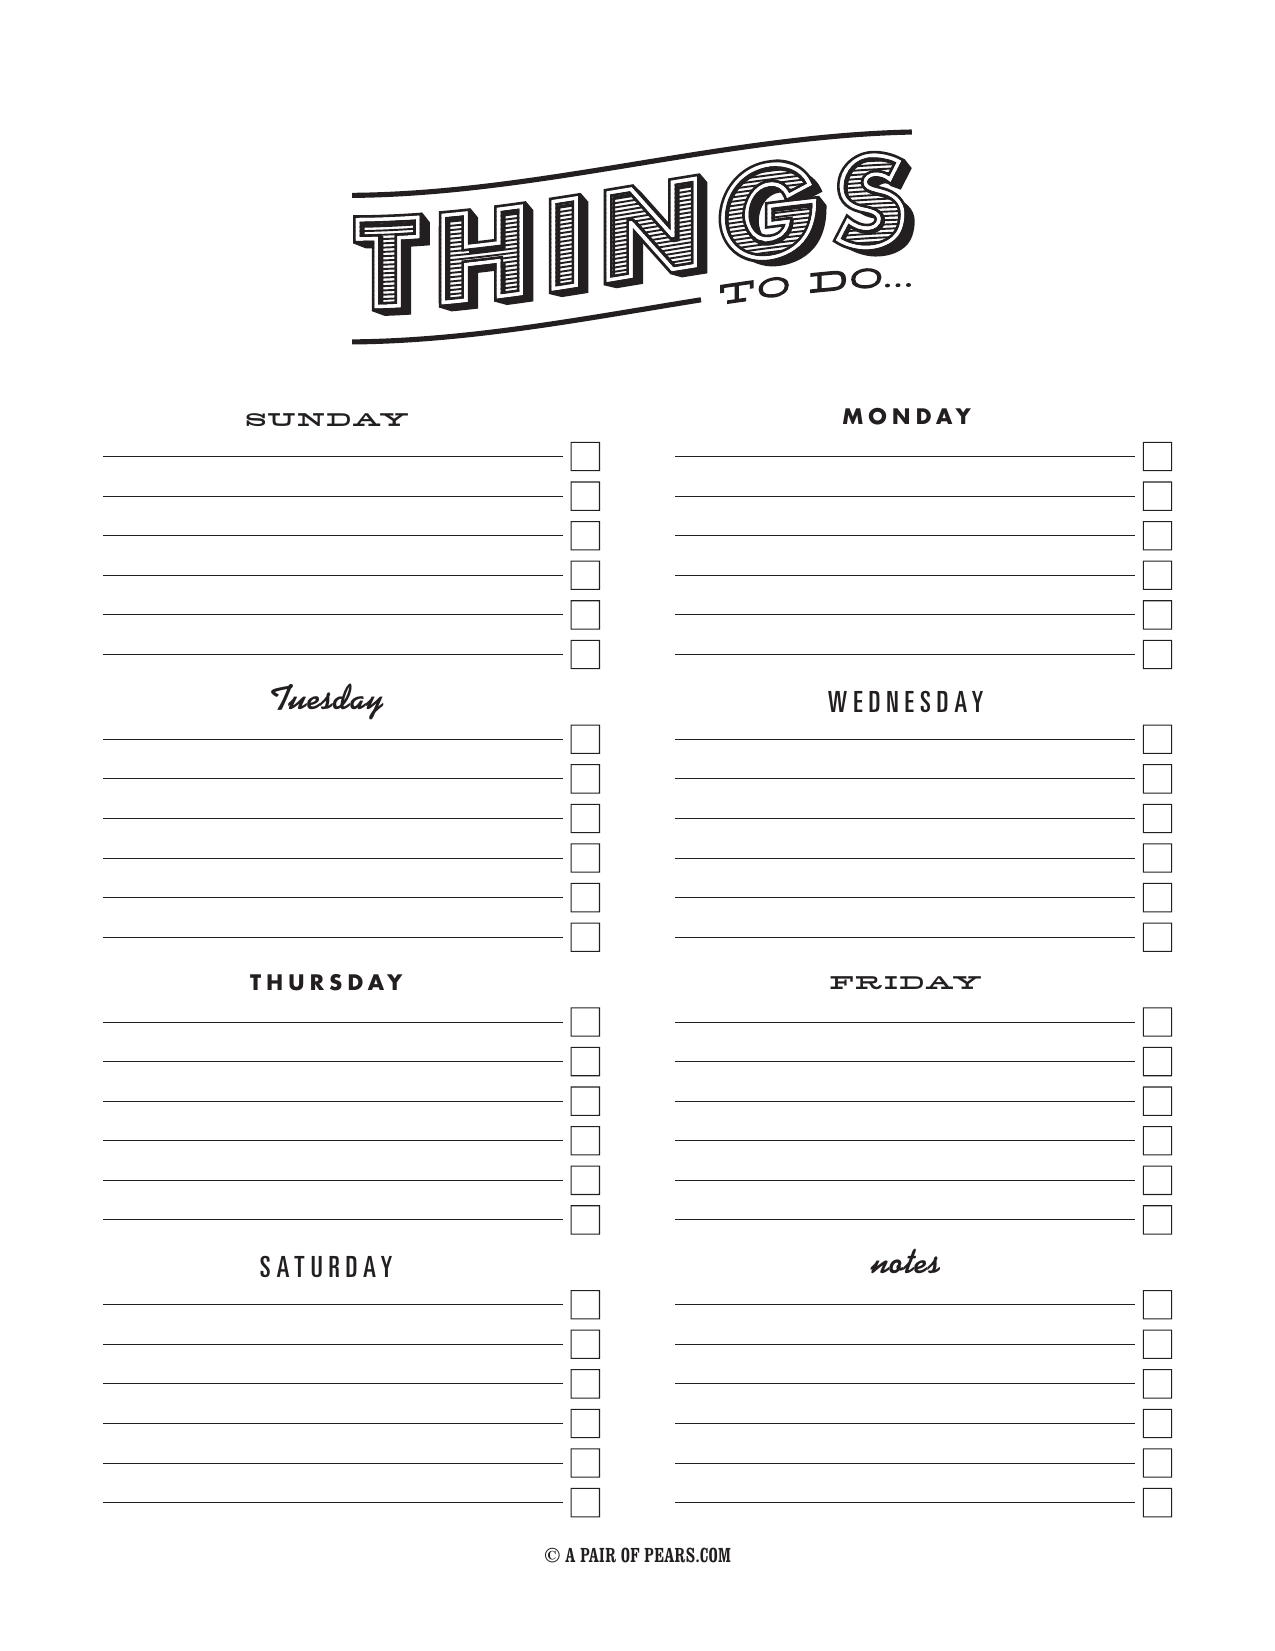 Download Weekly Checklist Template | Excel | Pdf | Rtf For Blank Checklist Template Word